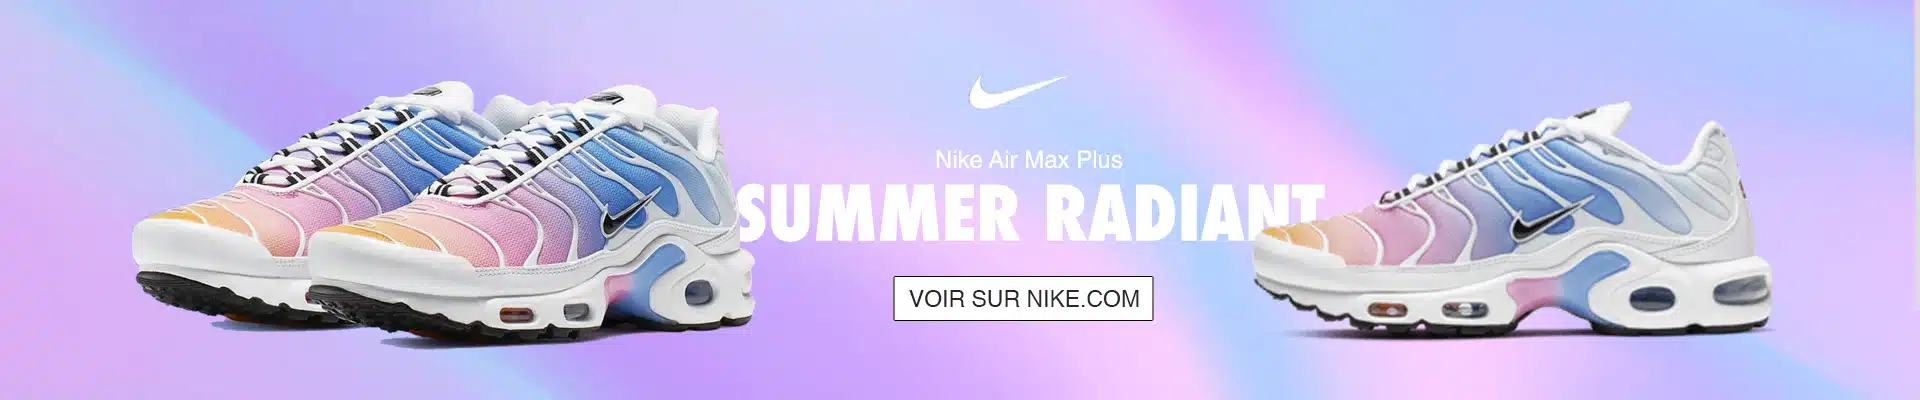 Nike Nike-sponsored private trainer and boxing coach Summer Gradient